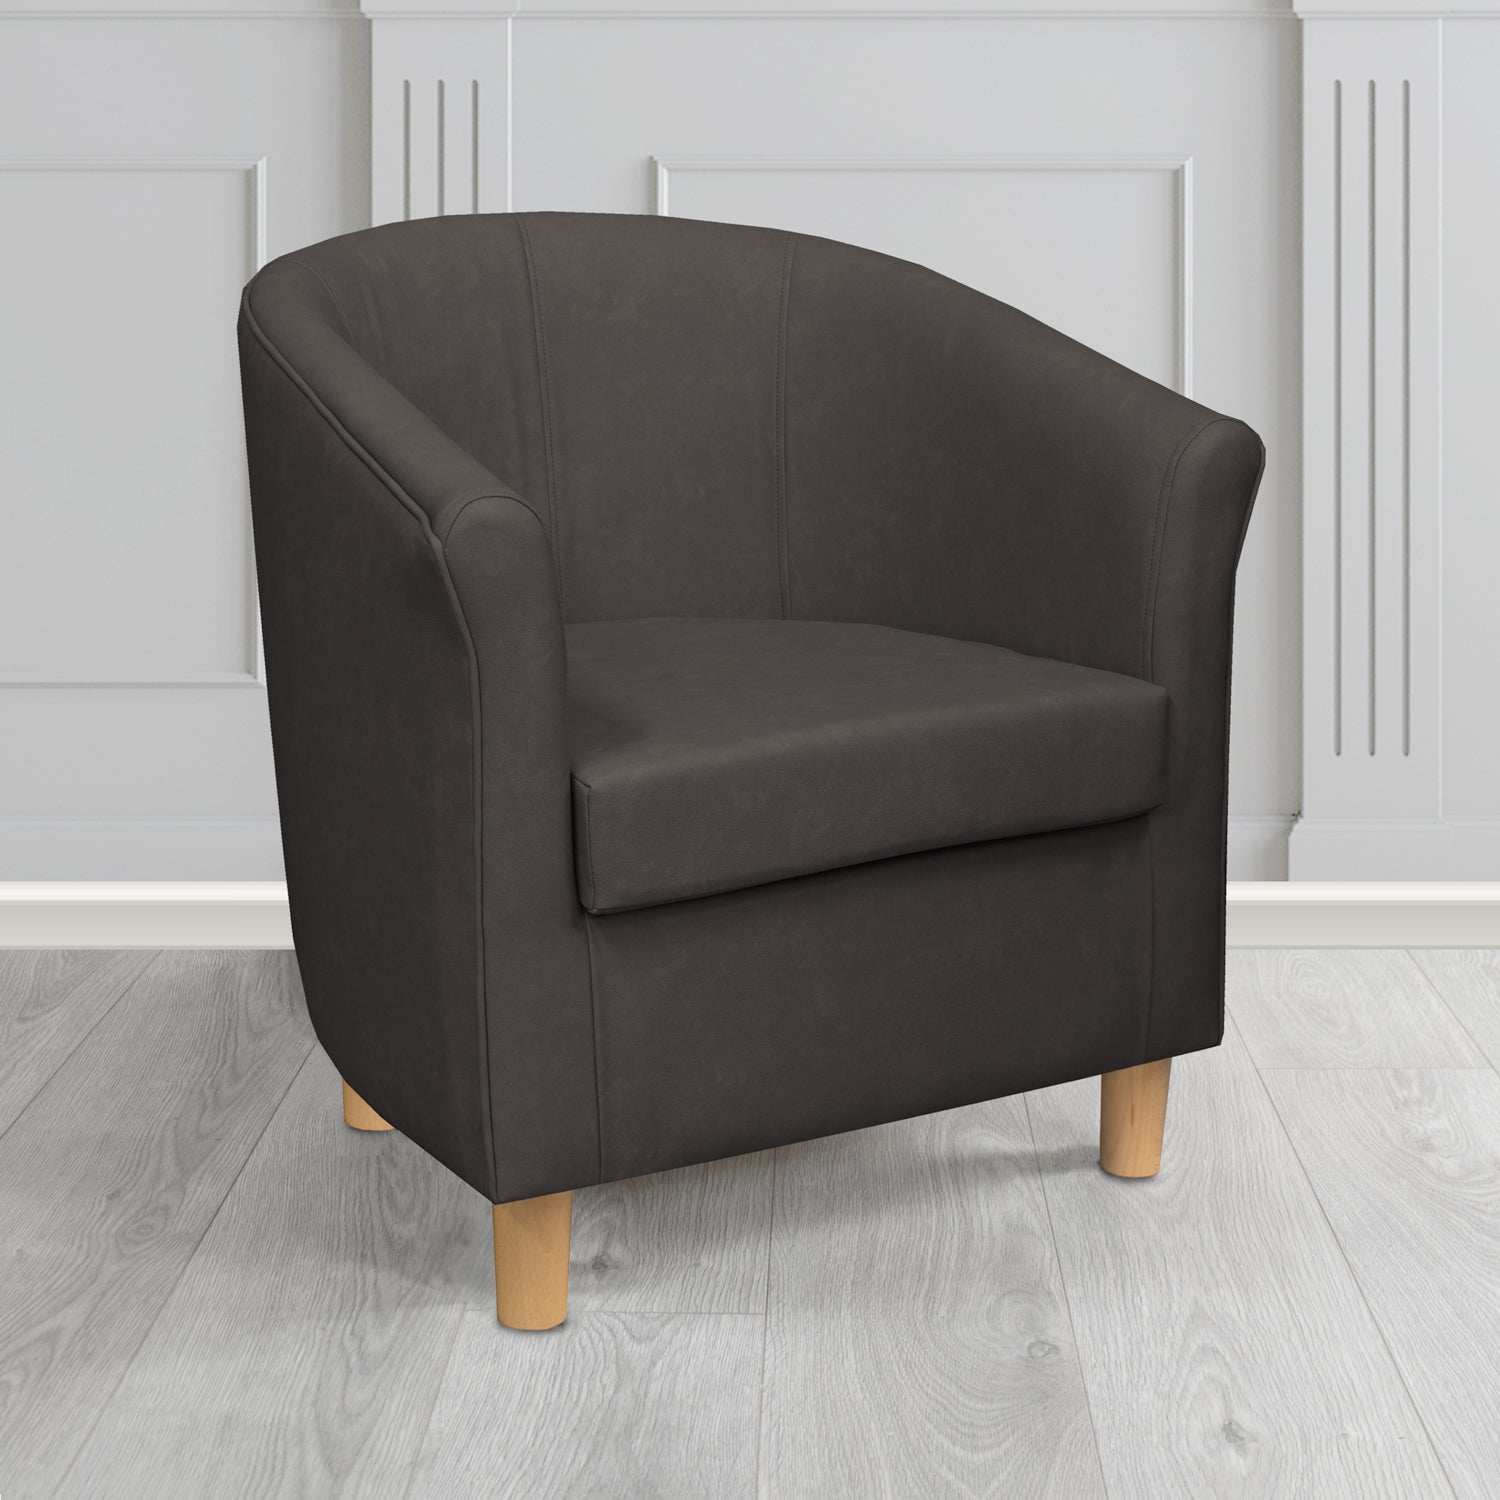 Tuscany Tub Chair in Infiniti Nugget INF1852 Antimicrobial Crib 5 Faux Leather - The Tub Chair Shop